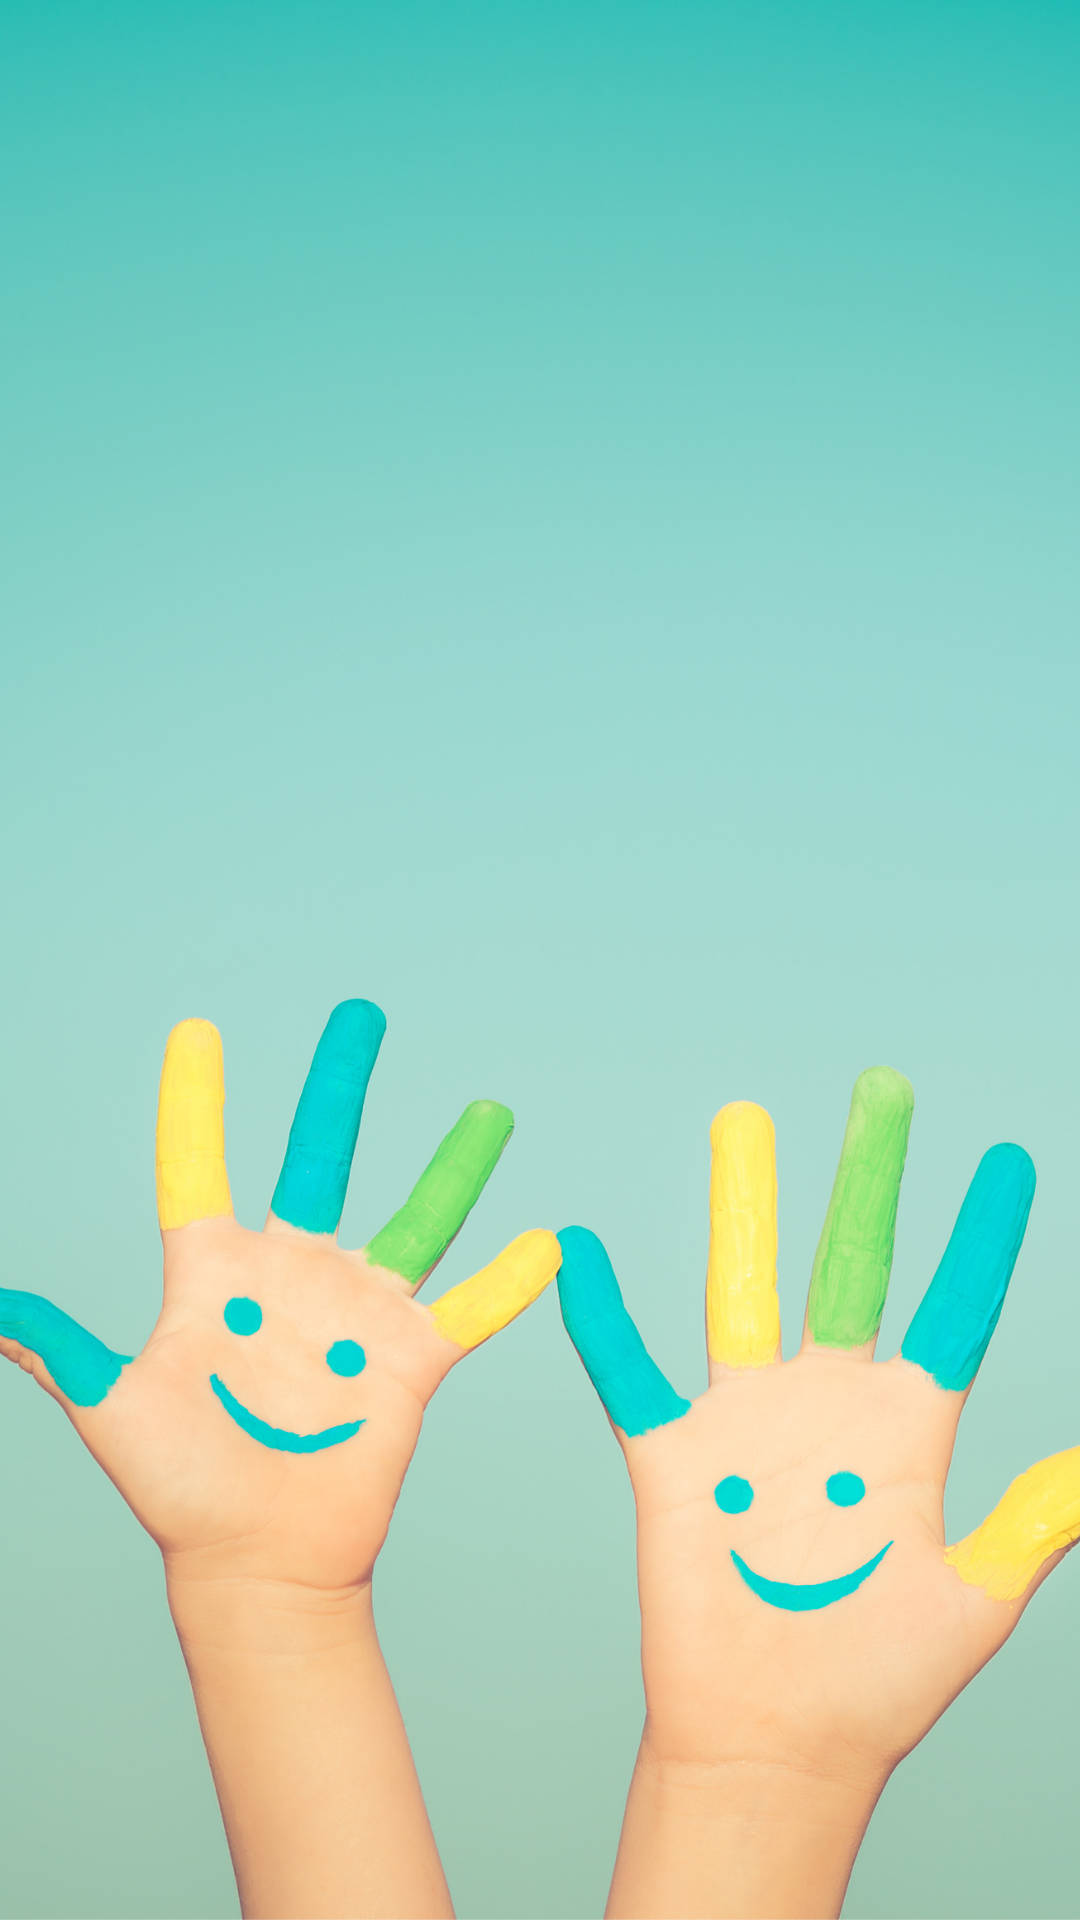 Hands Painted With Emojis Wallpaper